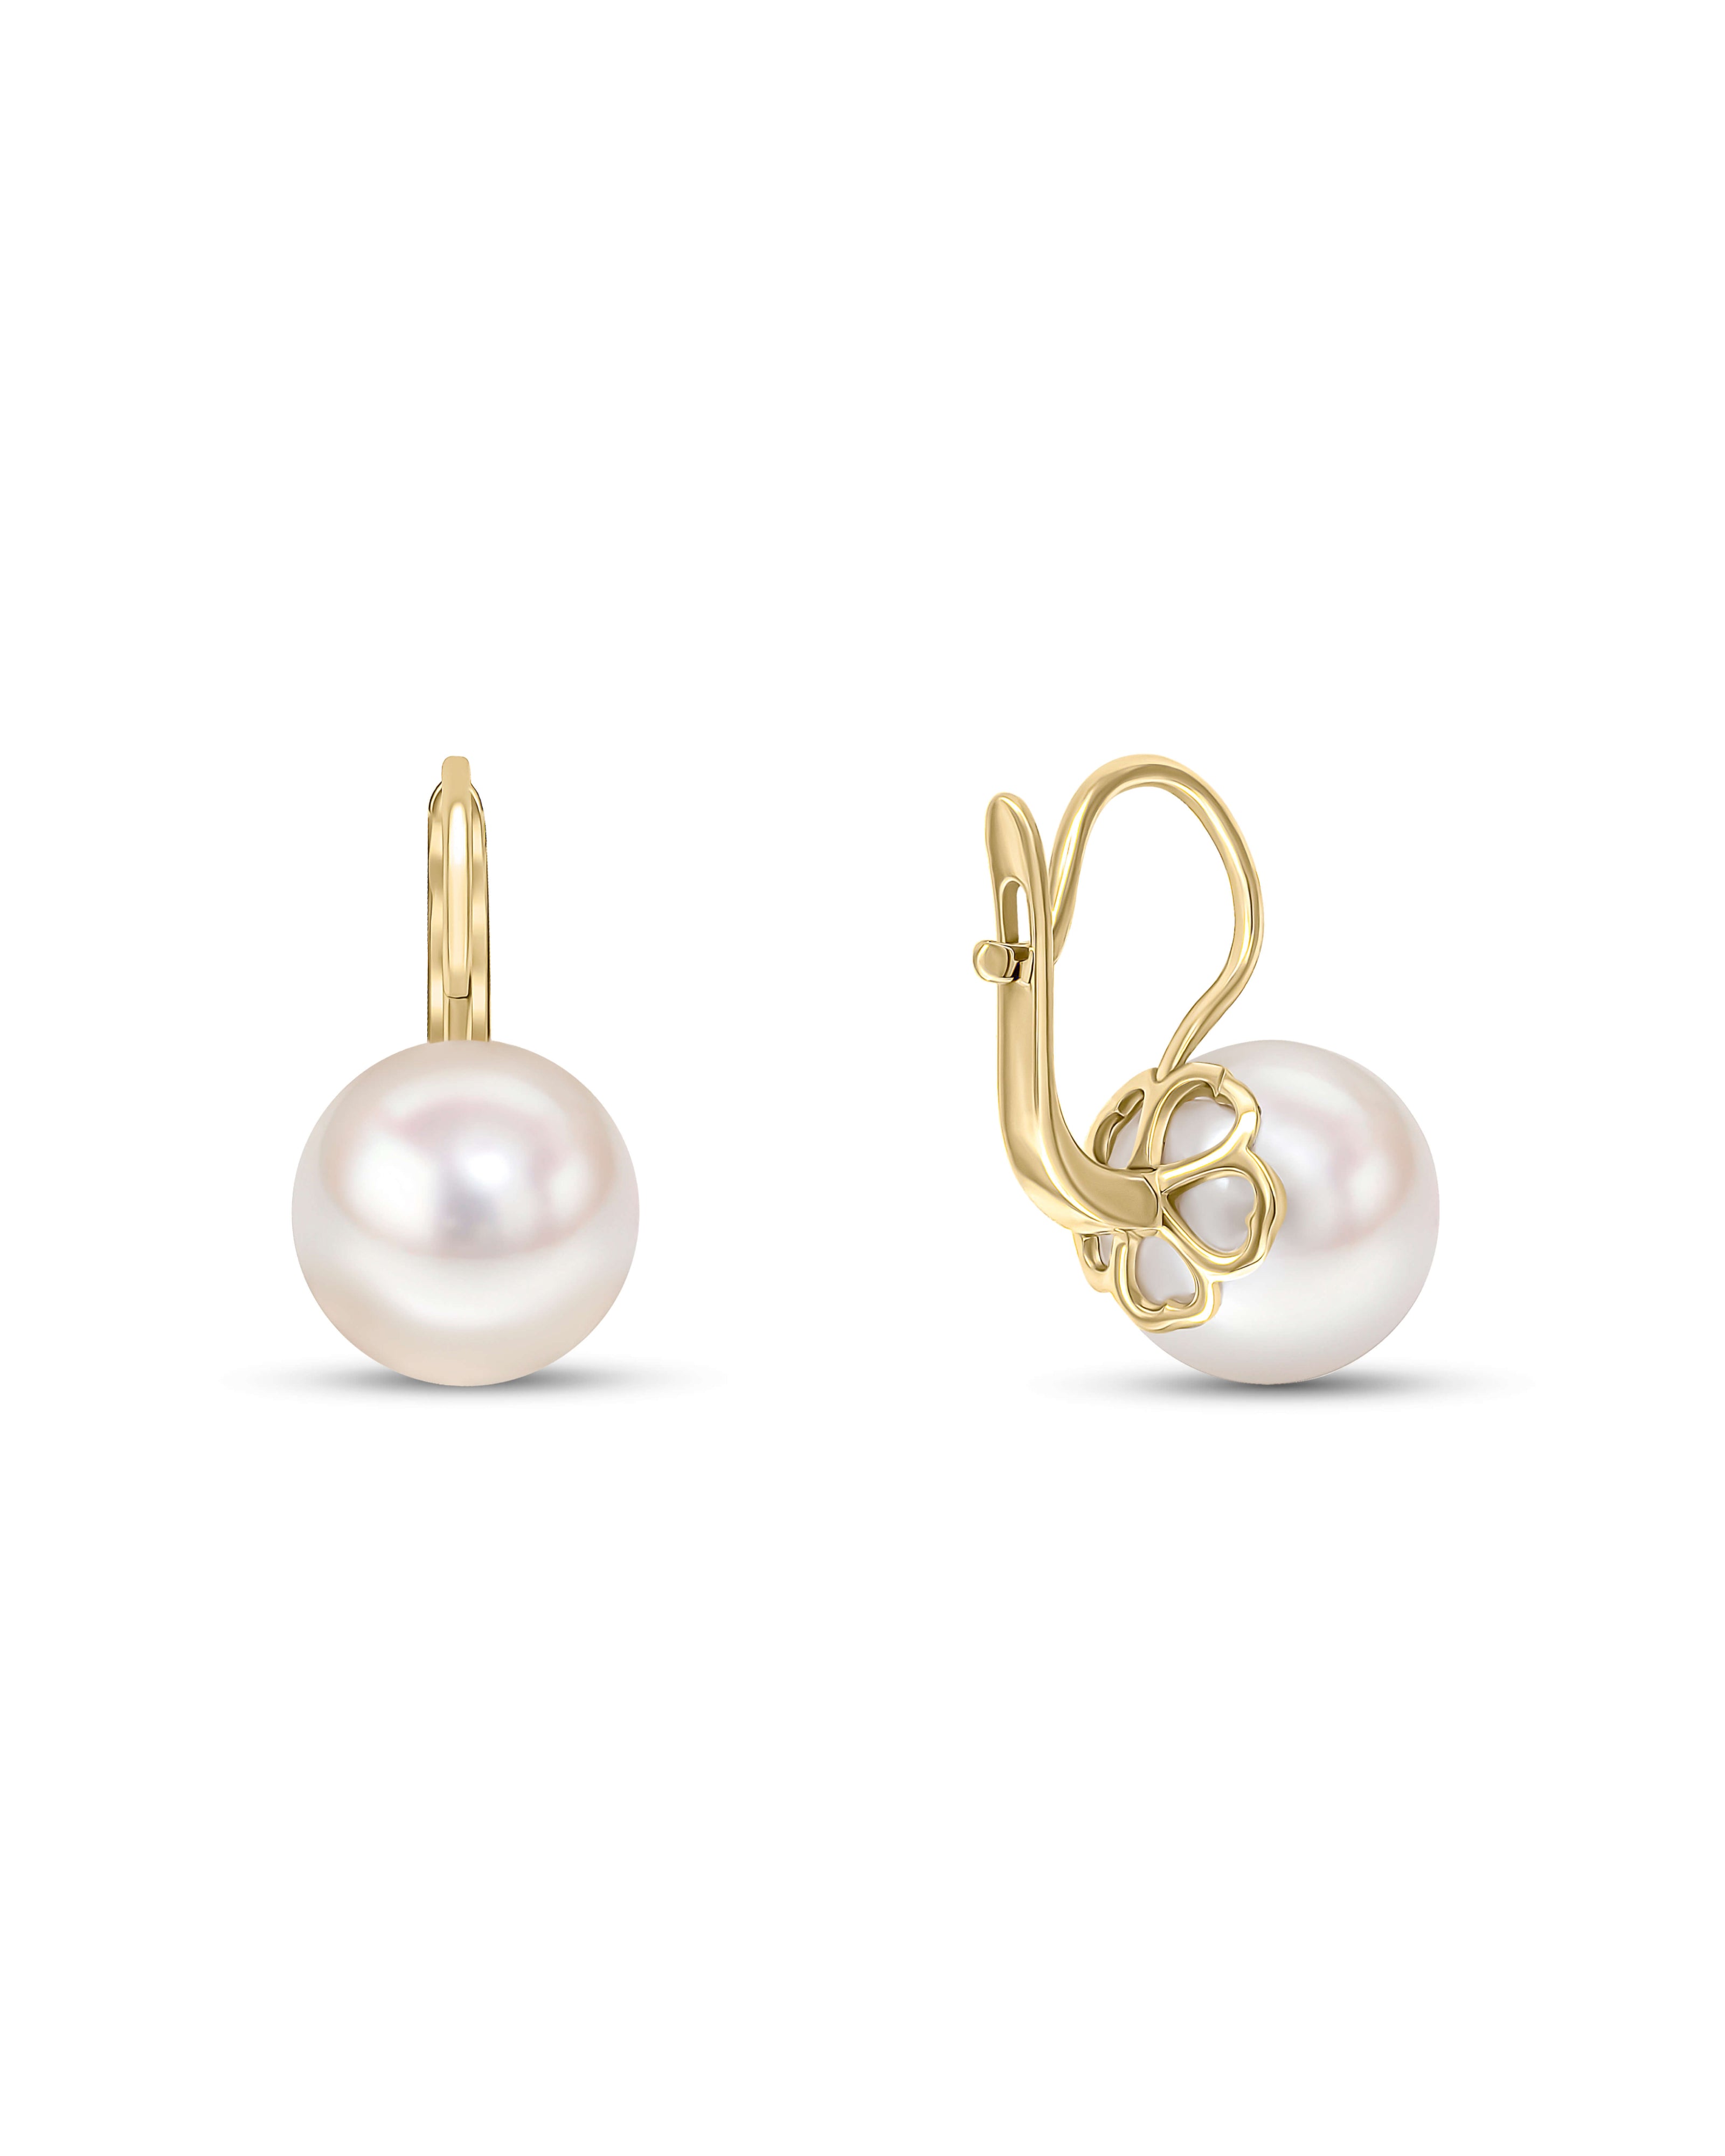 Amazon.com: Mierfyni Pearl Stud Earrings for Women, Faux Large Gold Pearl  Earrings Studs, Dainty White Big Pearl Earrings Pearl Statement Earrings,  18k Gold Plated Hammered Earrings 13mm Pearl Gold Studs: Clothing, Shoes